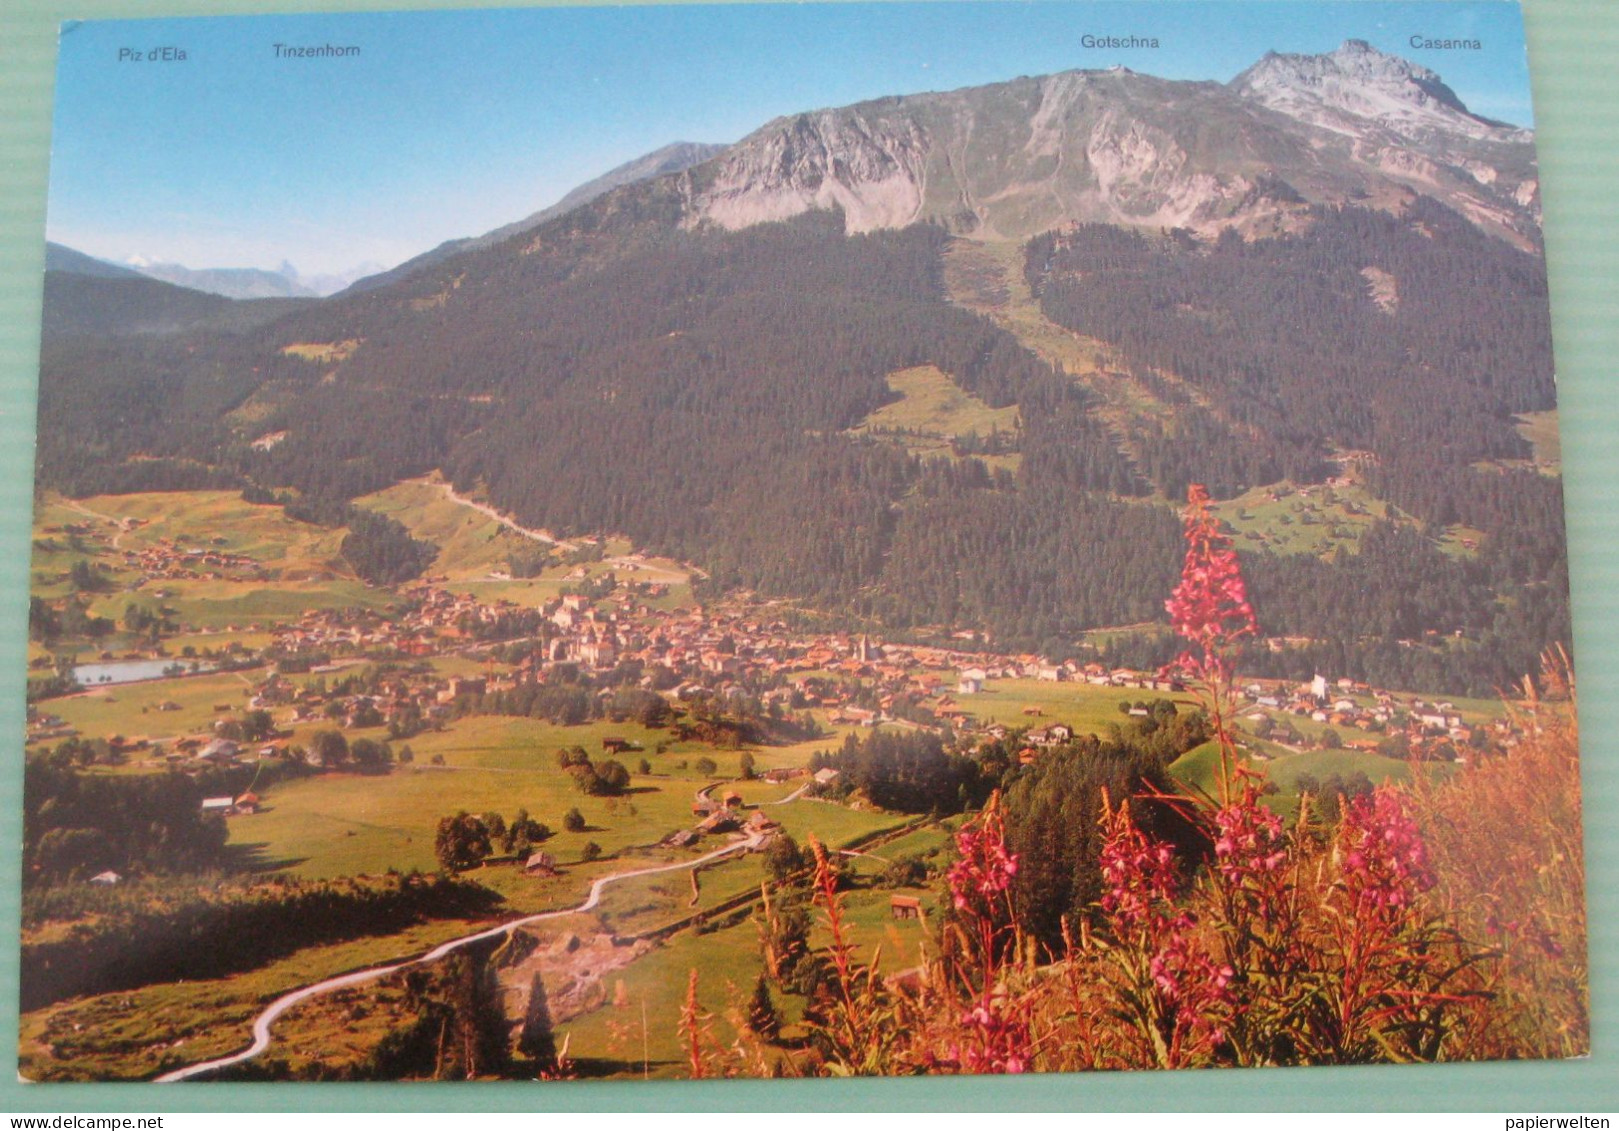 Klosters (GR)  - Panorama - Klosters